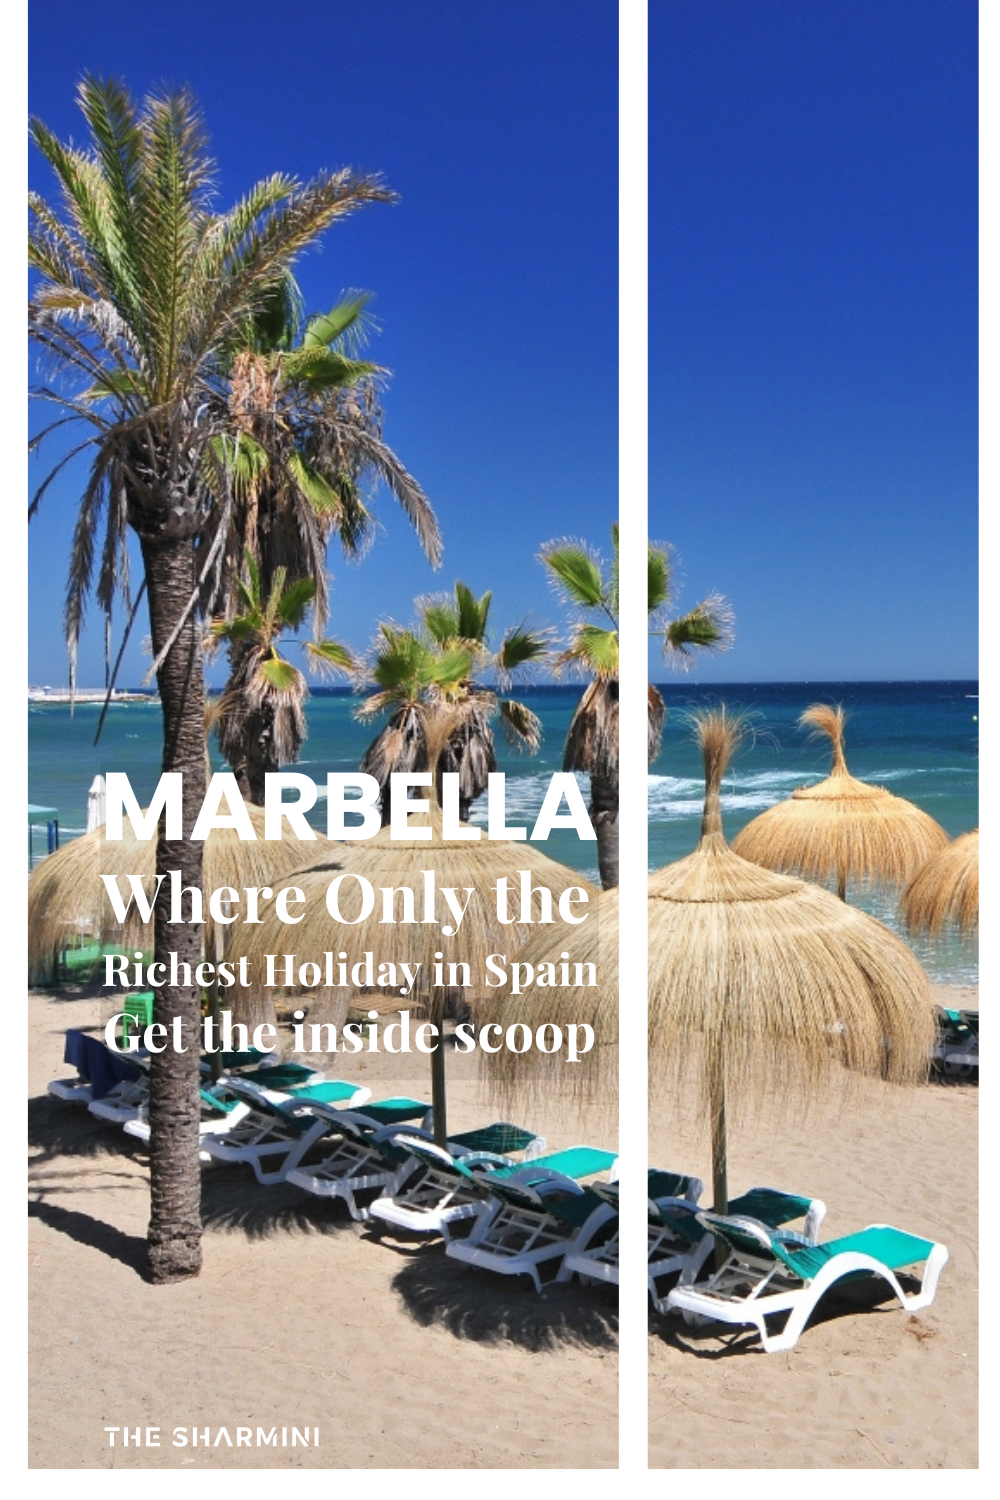 Is Marbella Spain safe for solo female travelers?